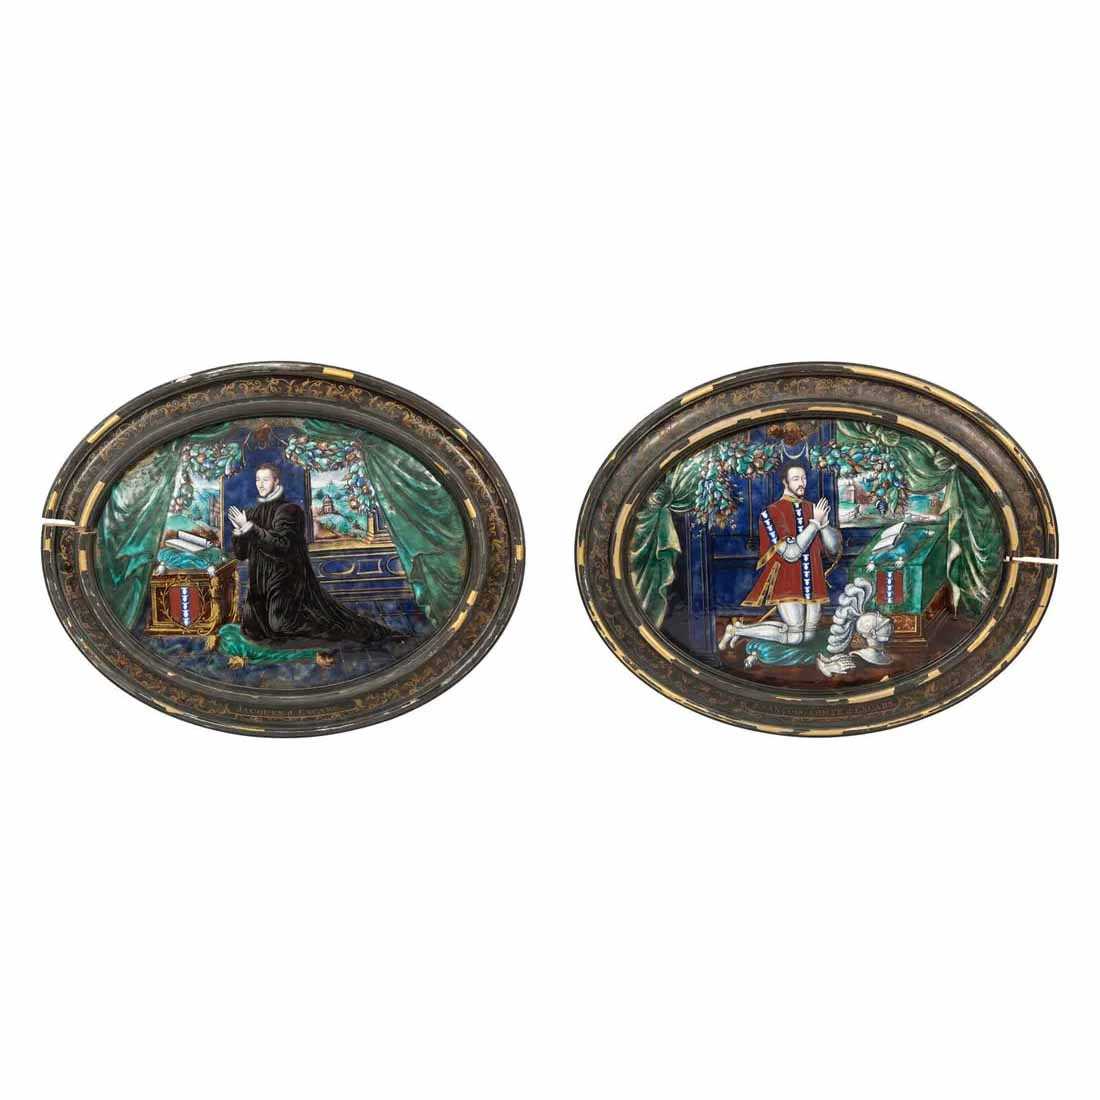 Limoges enameled copper plaques attributed to Leonard Limousin top $537K at Freeman&#8217;s Hindman